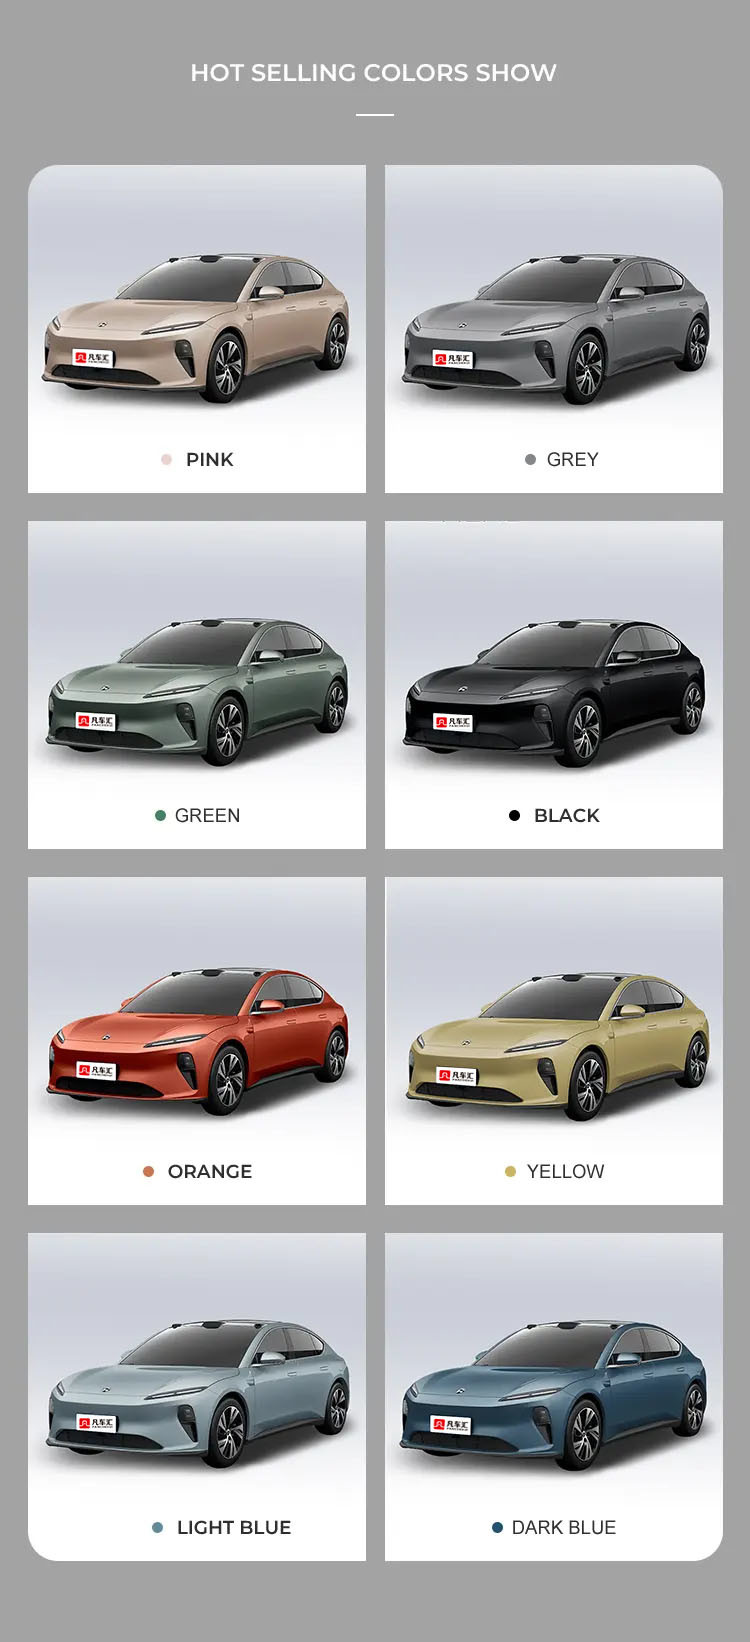 China /Nextev Nio Et5 High-Profile Luxury 100% Pure Electric /Home Use/Comfort/China′s High-End Electric Vehicle/Car